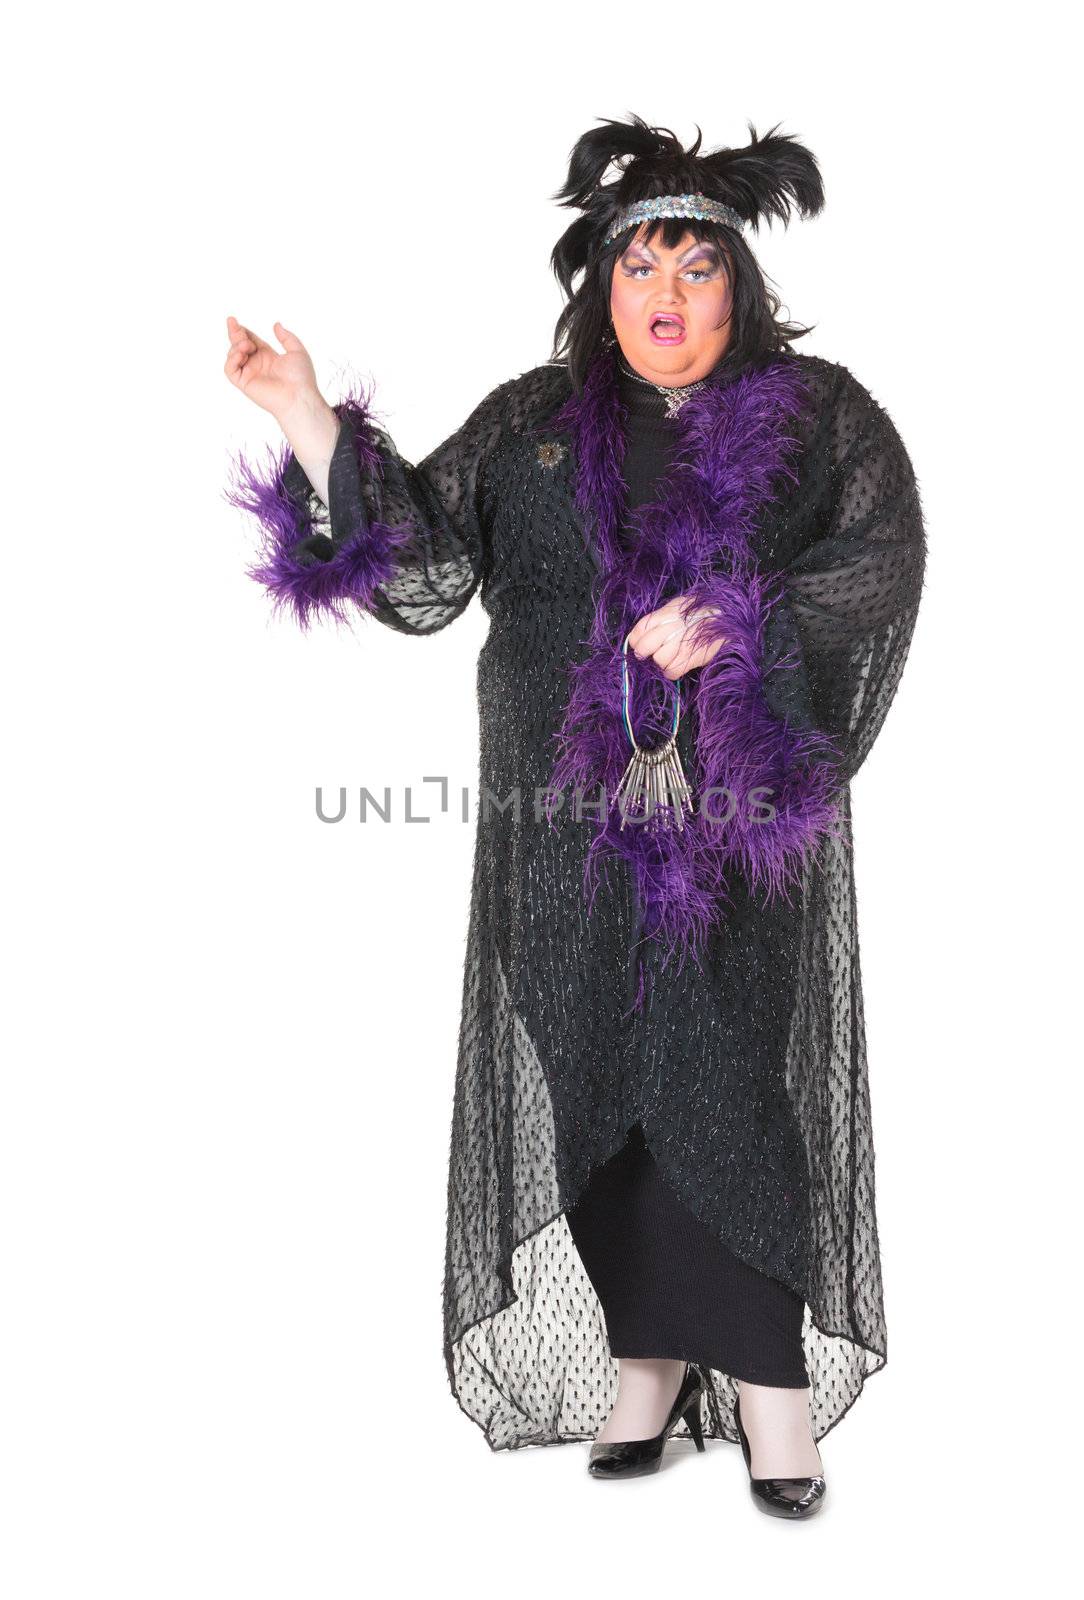 Cheerful man, Drag Queen, in a Female Suit by Discovod